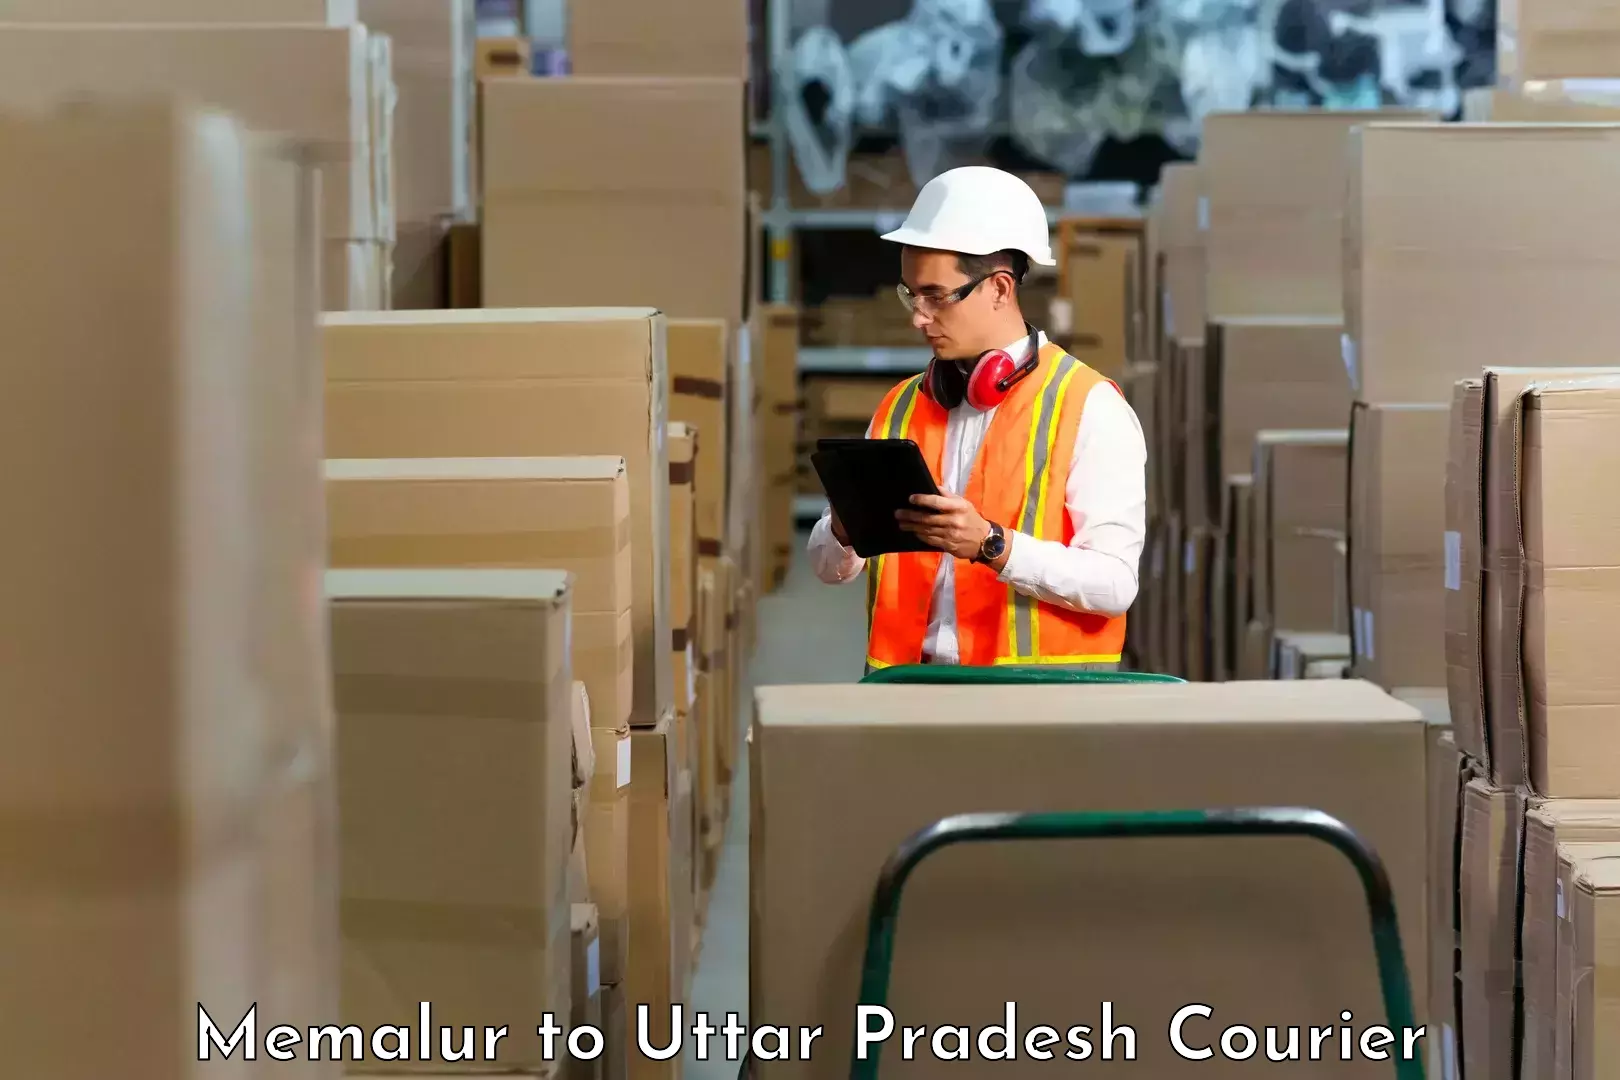 Multi-service courier options Memalur to Sultanpur Avadh